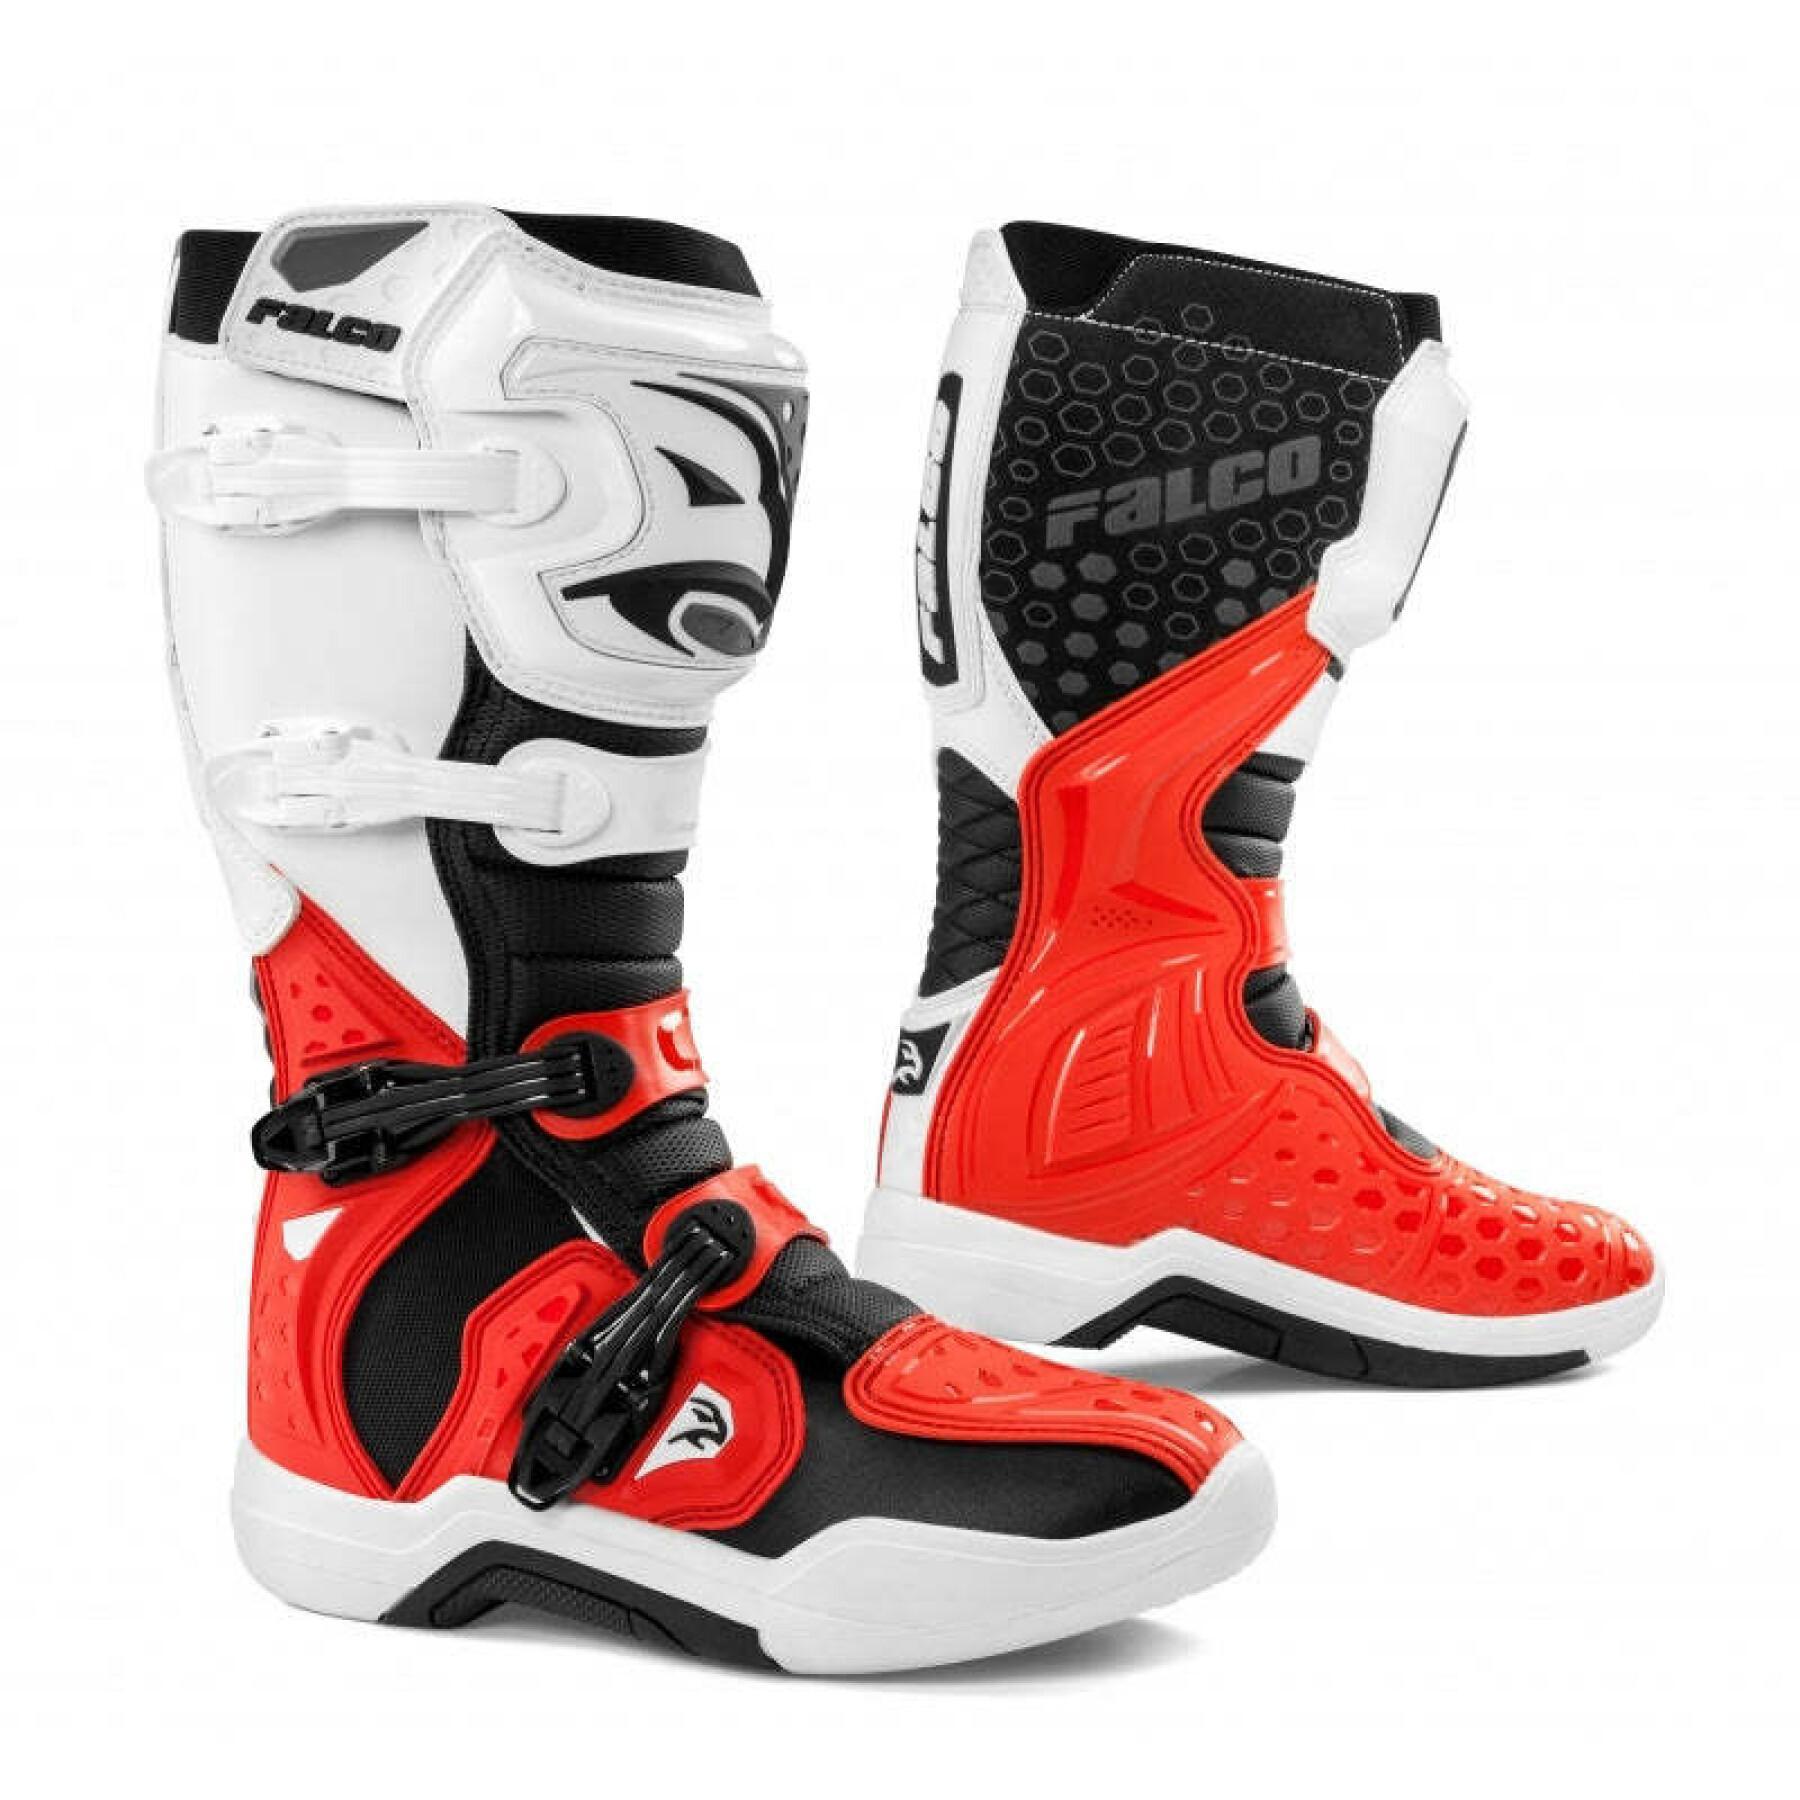 Motorcycle cross boots Falco Level